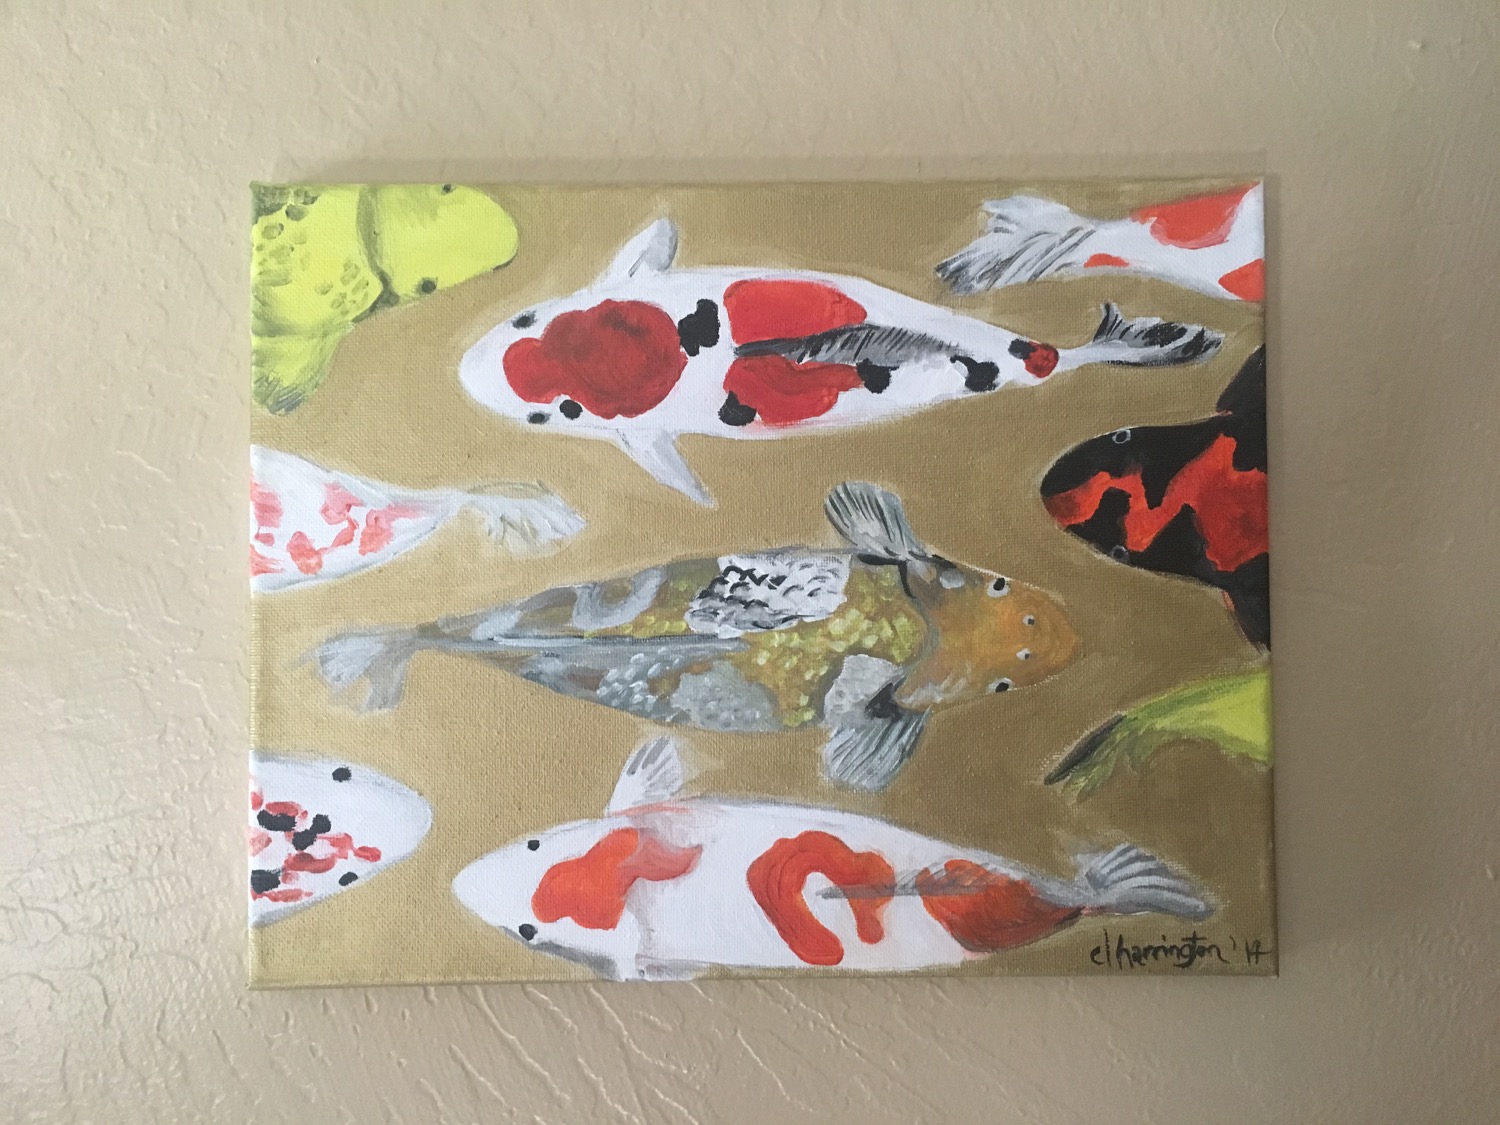 Koi Fish Varieties, Acrylic on Canvas, 11 x 14 inches, 2014